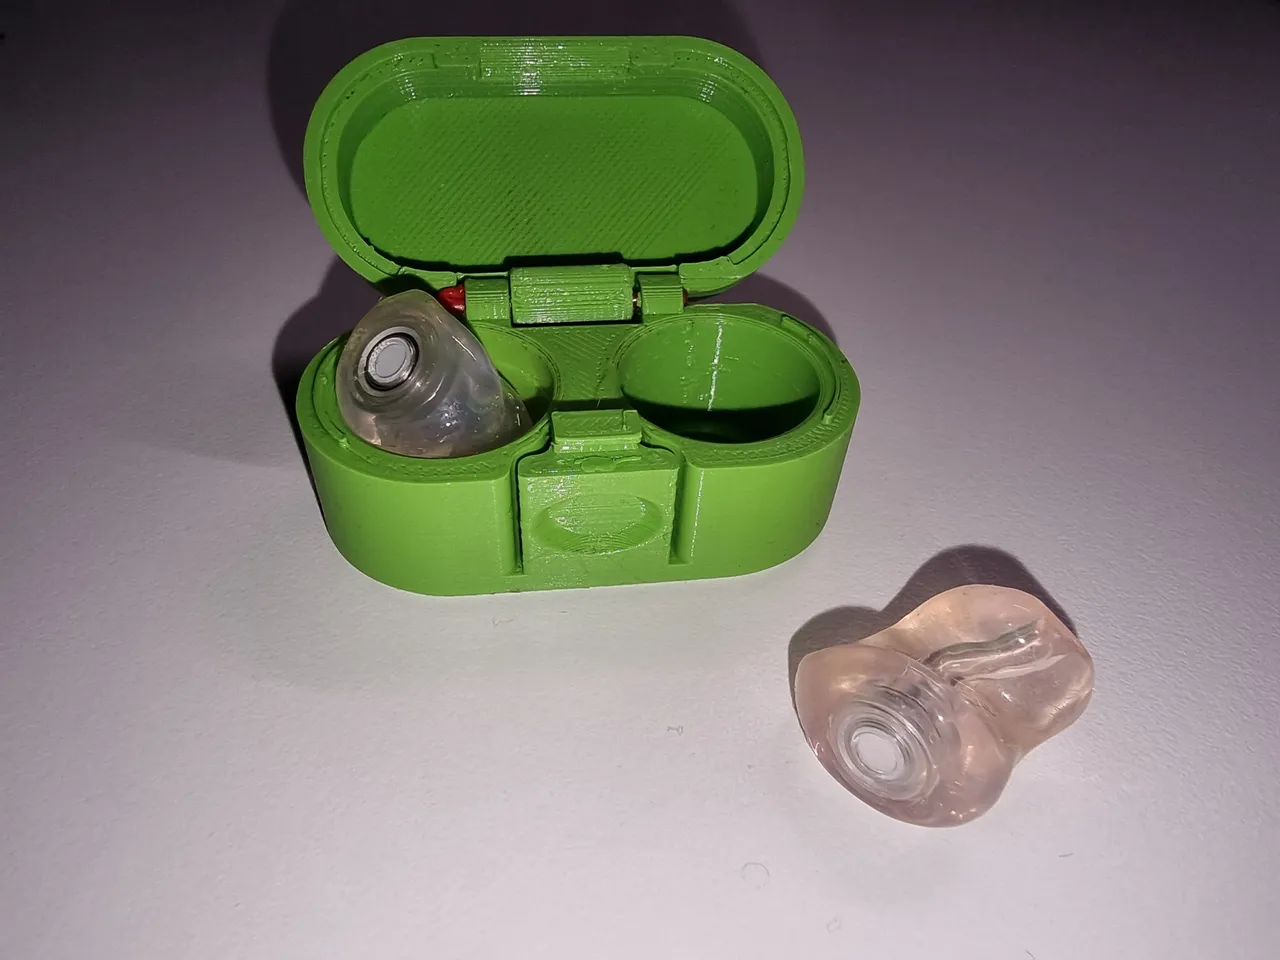 Earplugs case for Earplugs with acoustic filter by KaoZ